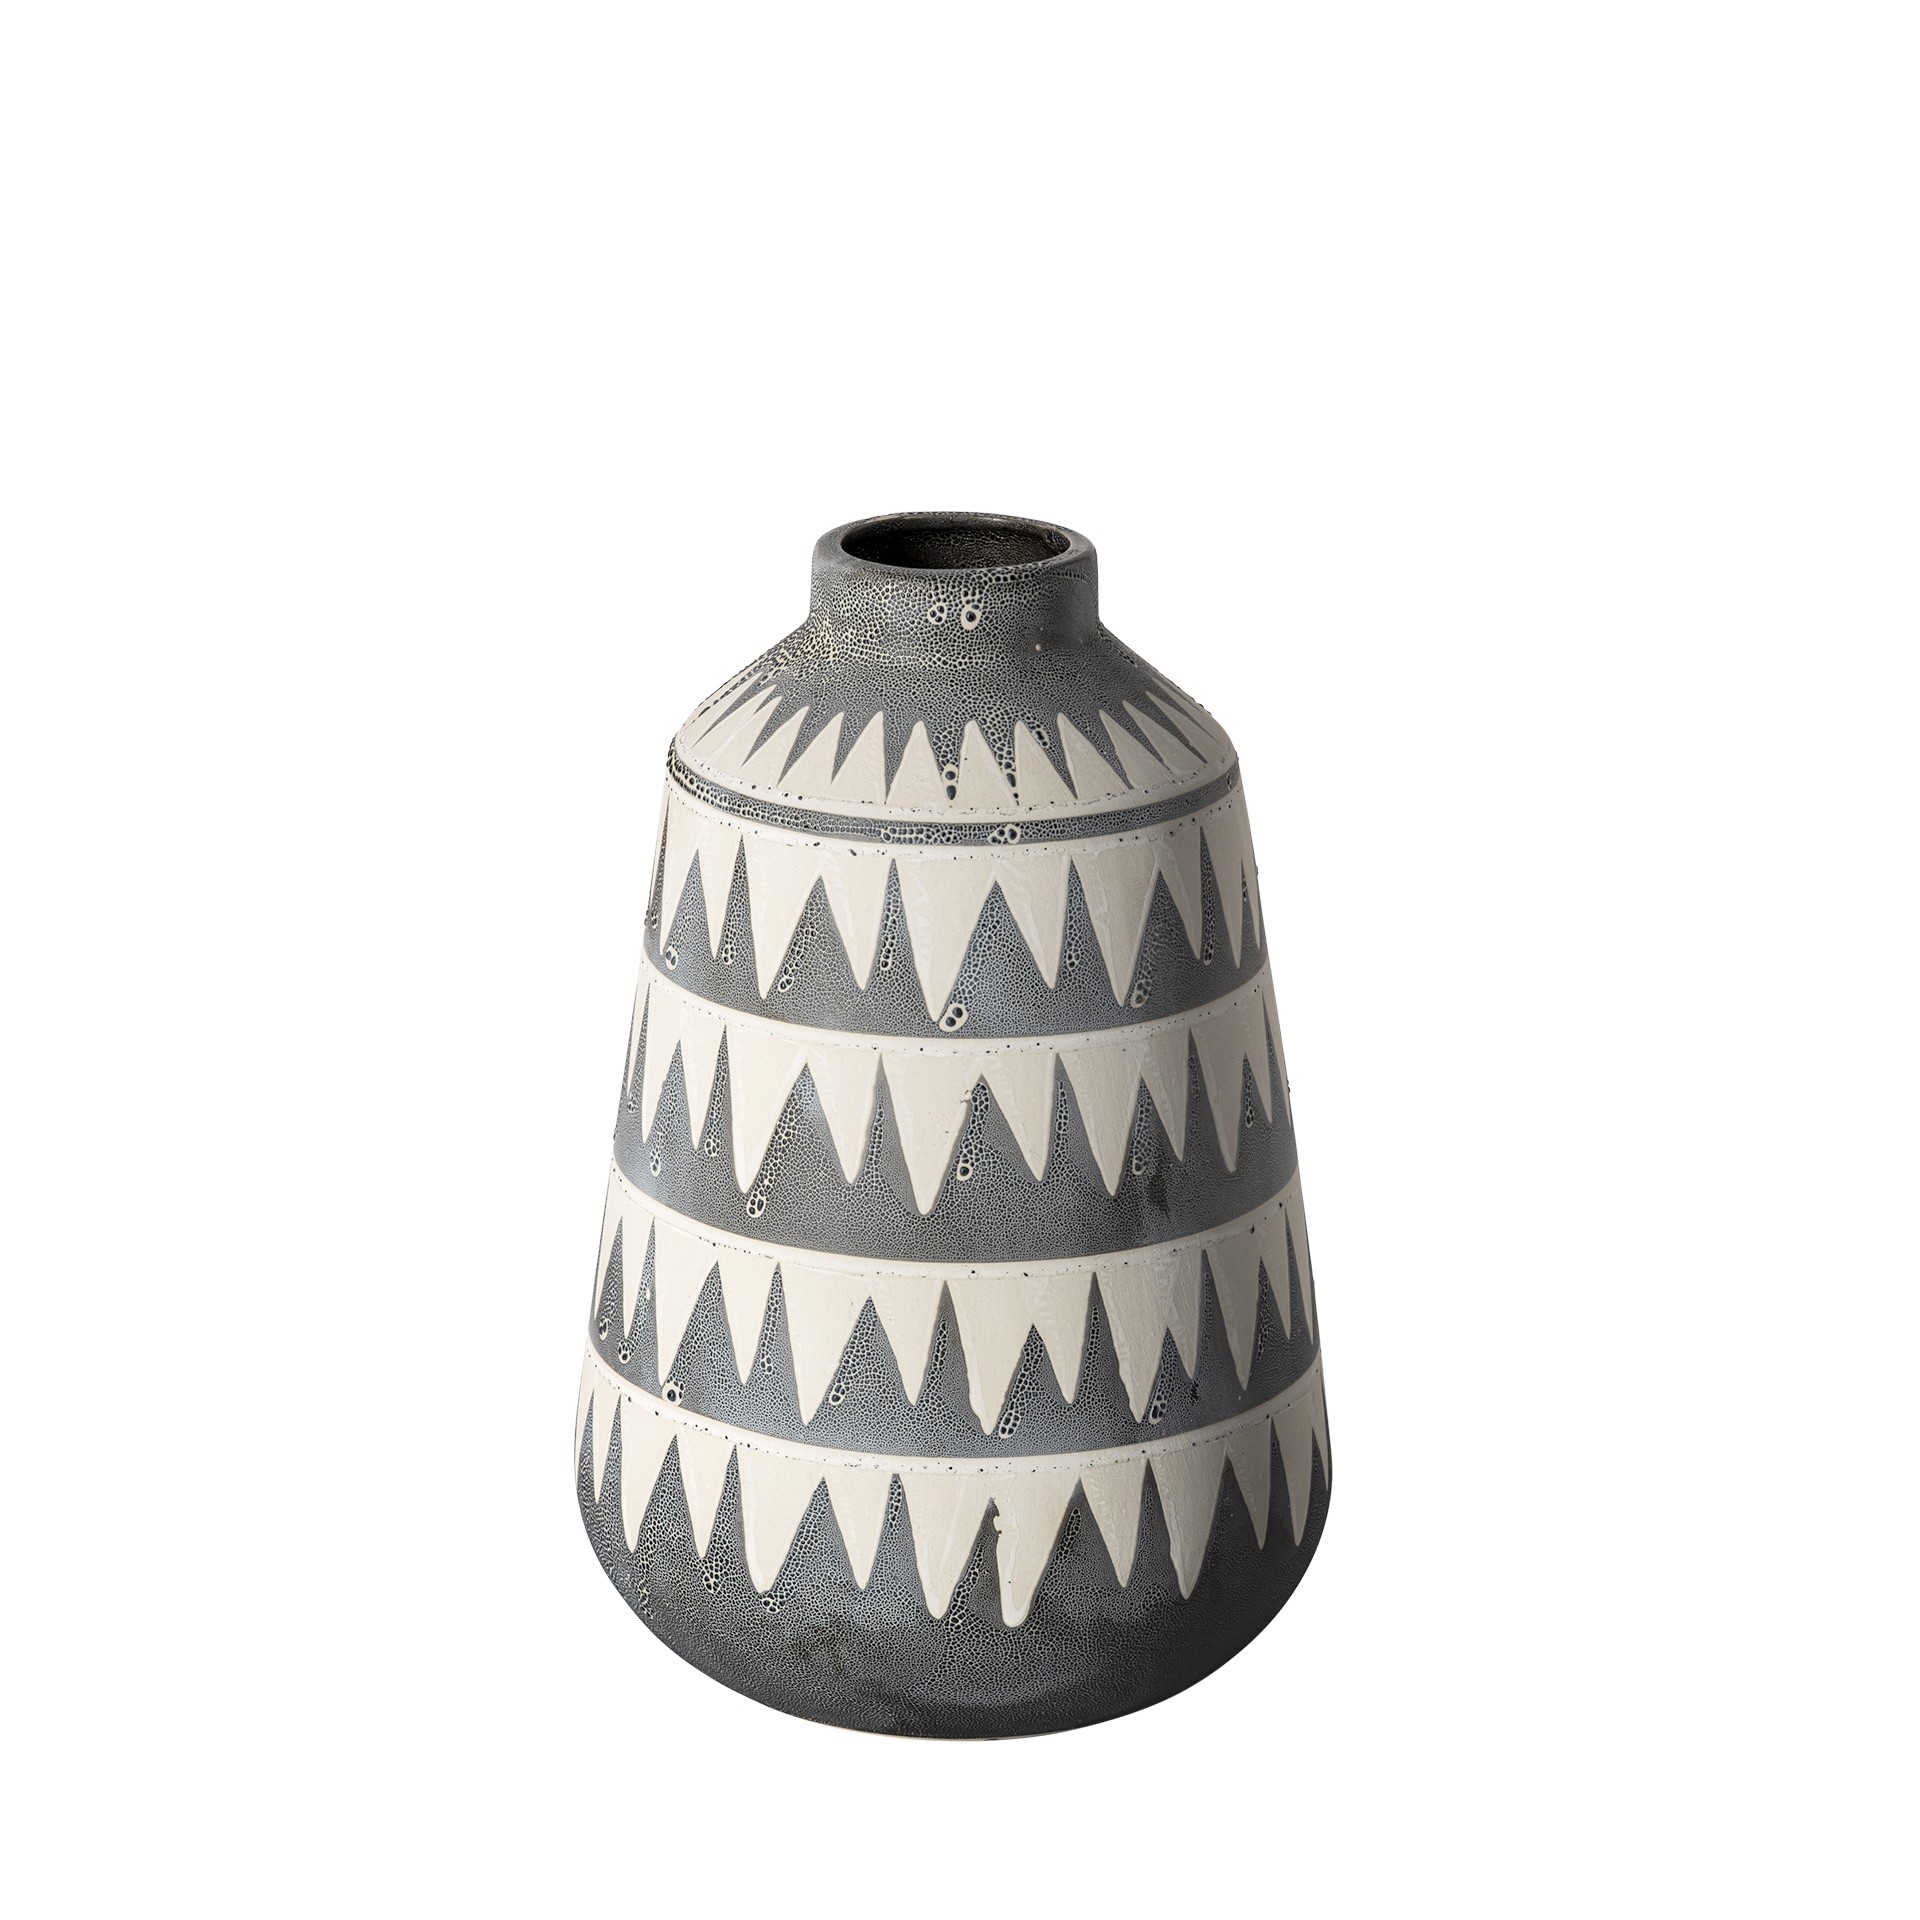 10" Gray and Ivory Triangle Pattern Ceramic Vase